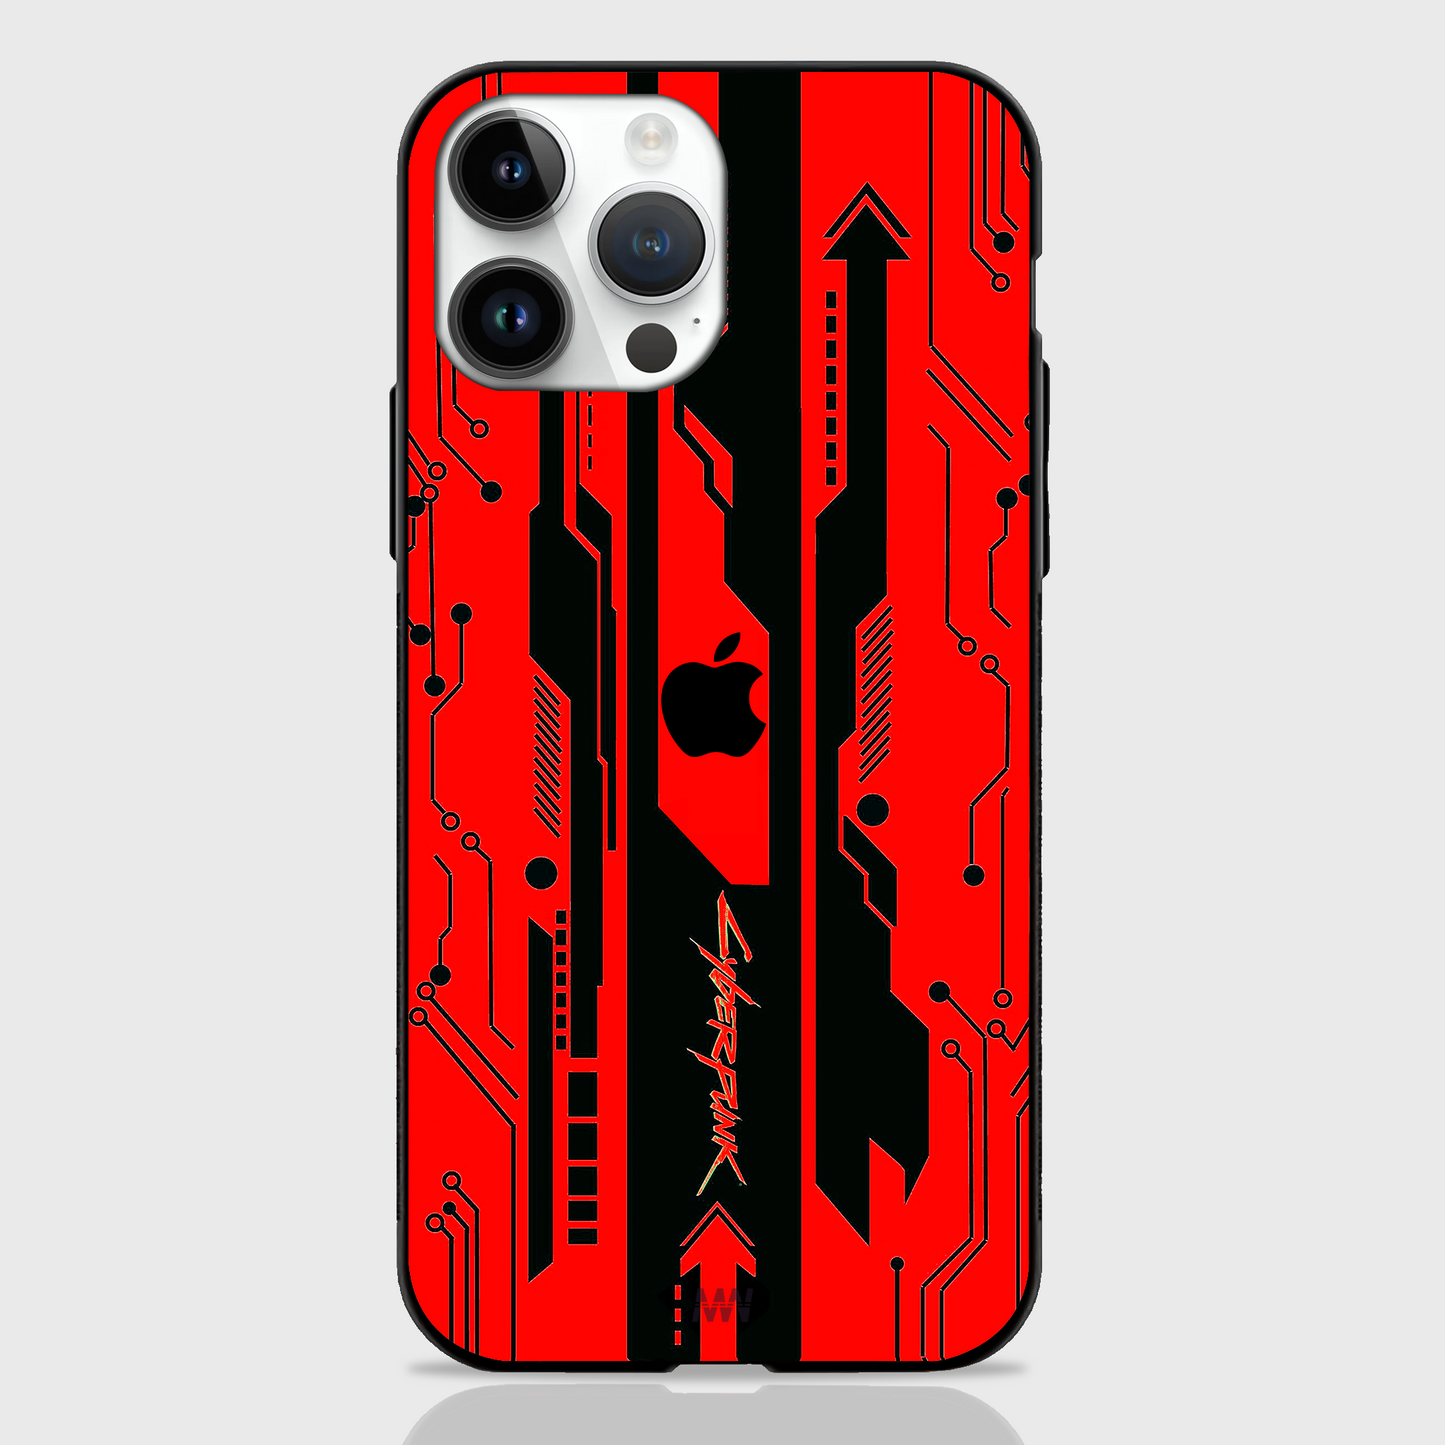 Gaming Abstract Theme GLASS CASES (Yellow, Black, Red & White)